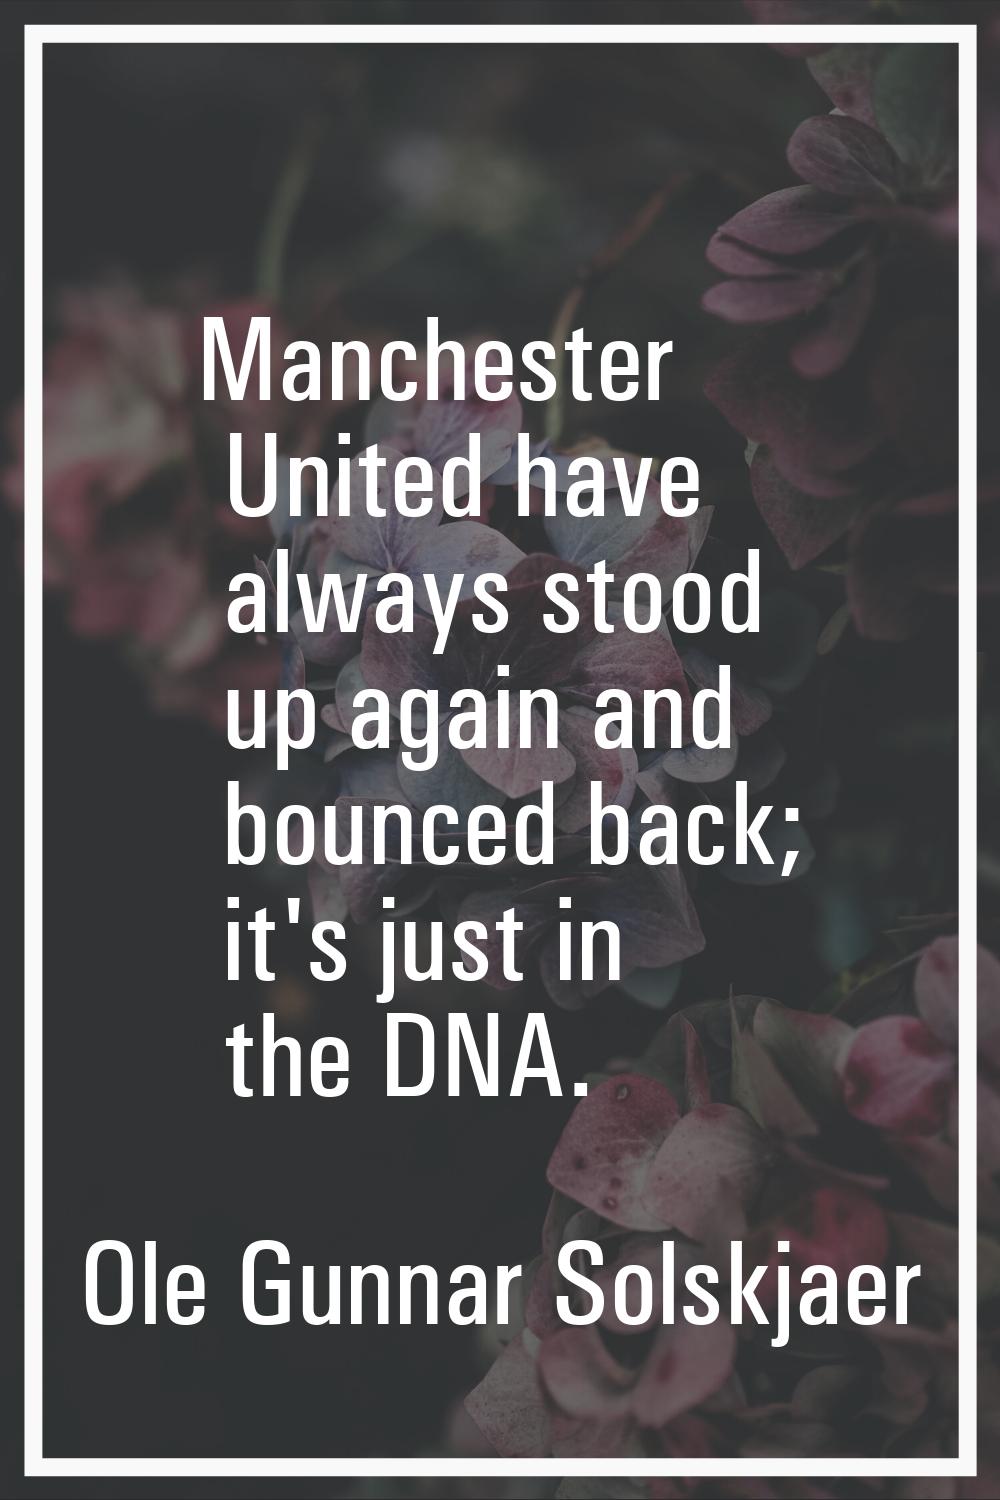 Manchester United have always stood up again and bounced back; it's just in the DNA.